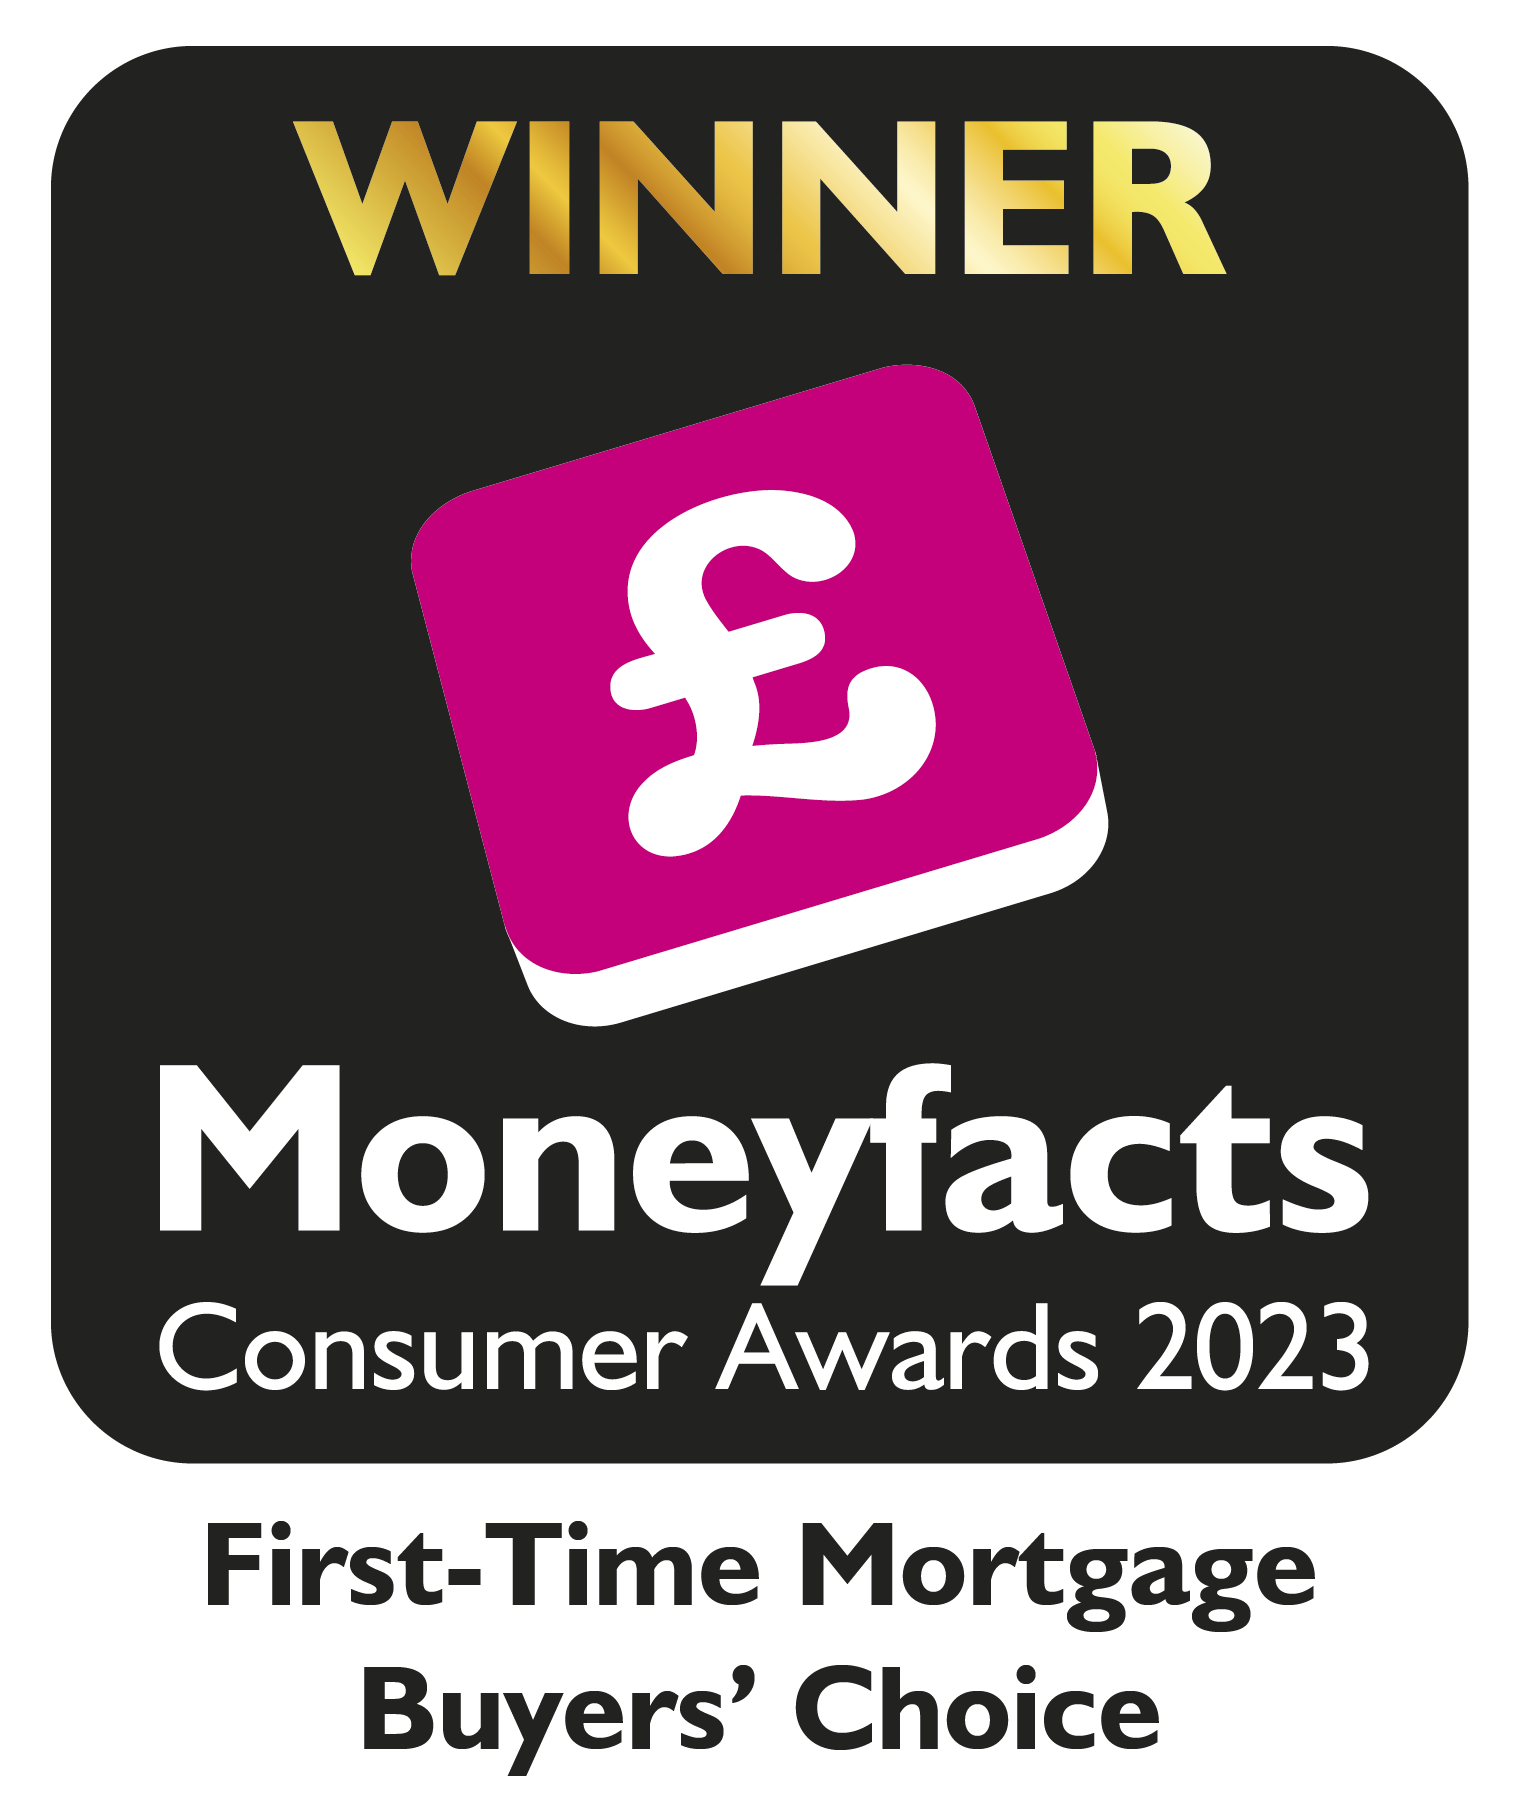 moneyfacts consumer award 2023 - first time buyers choice